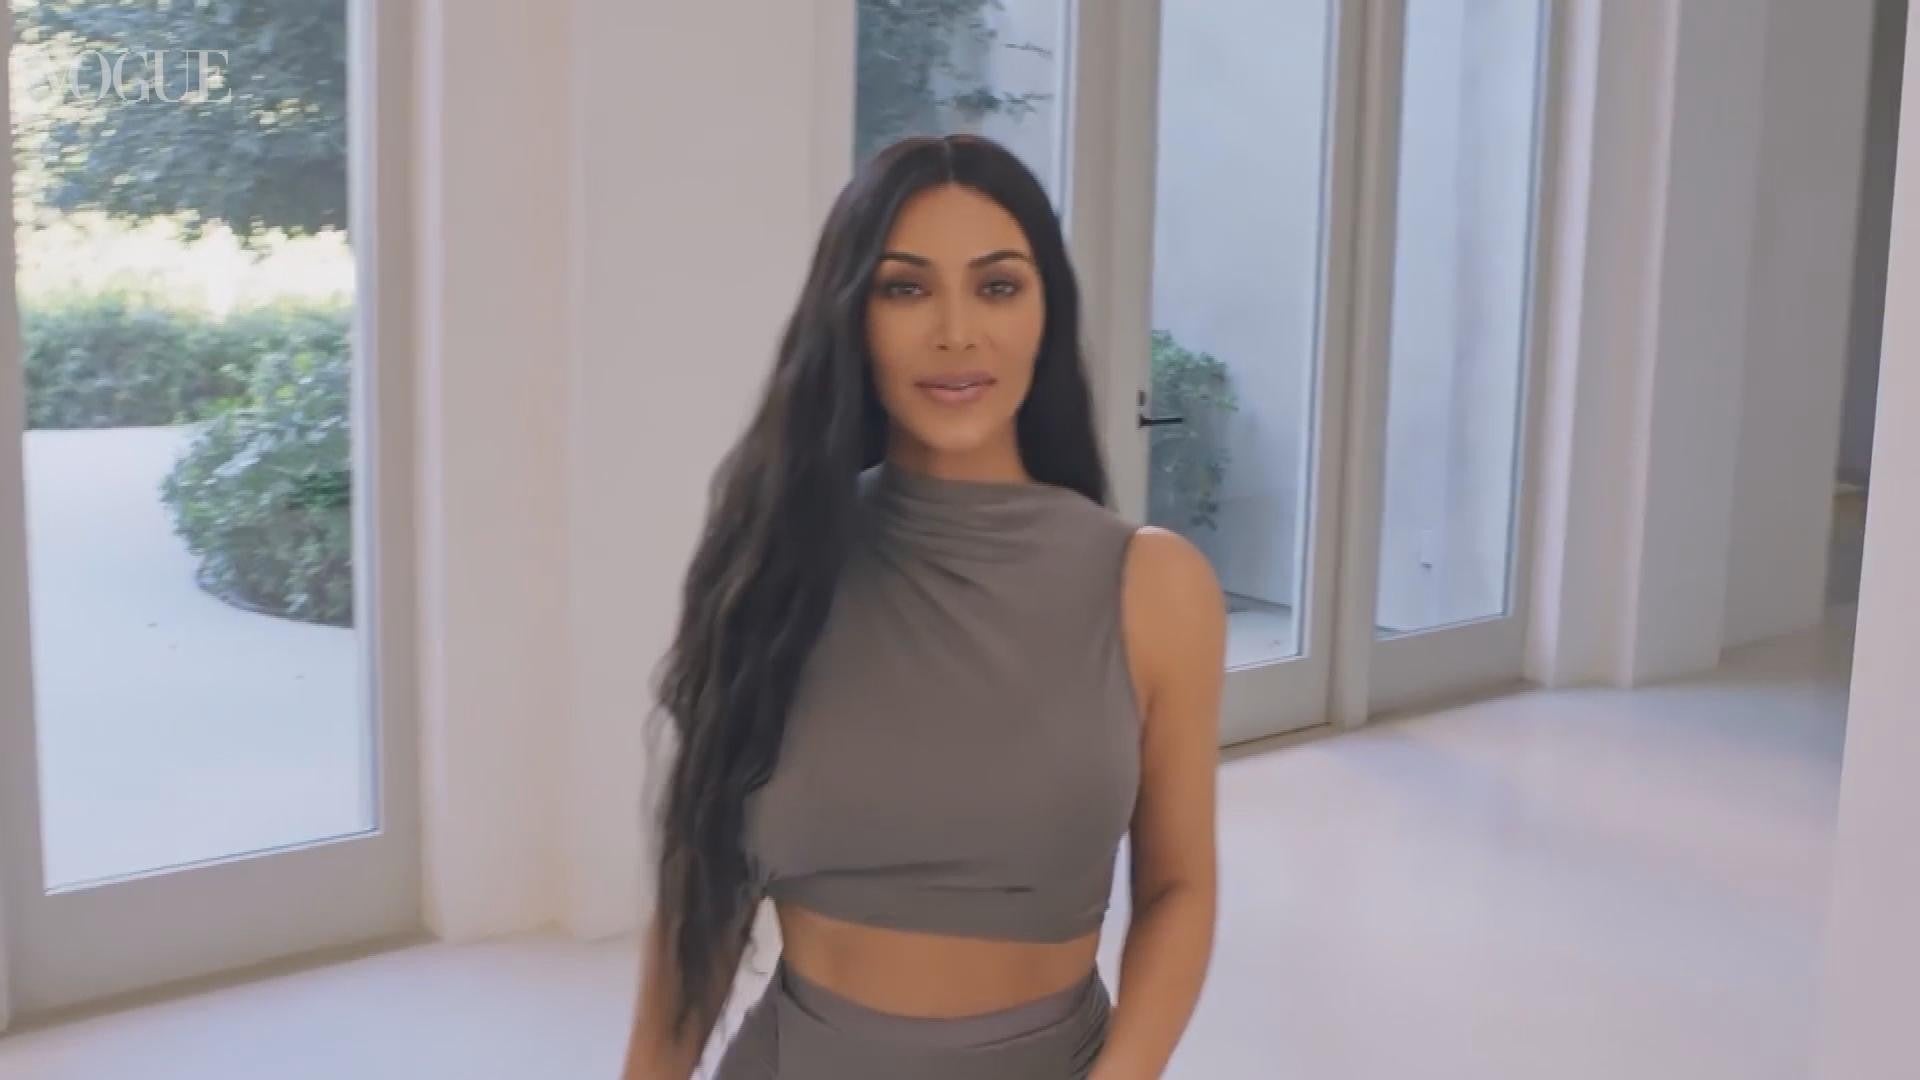 Kim Kardashian And Kanye West Take Fans Inside Their Home With